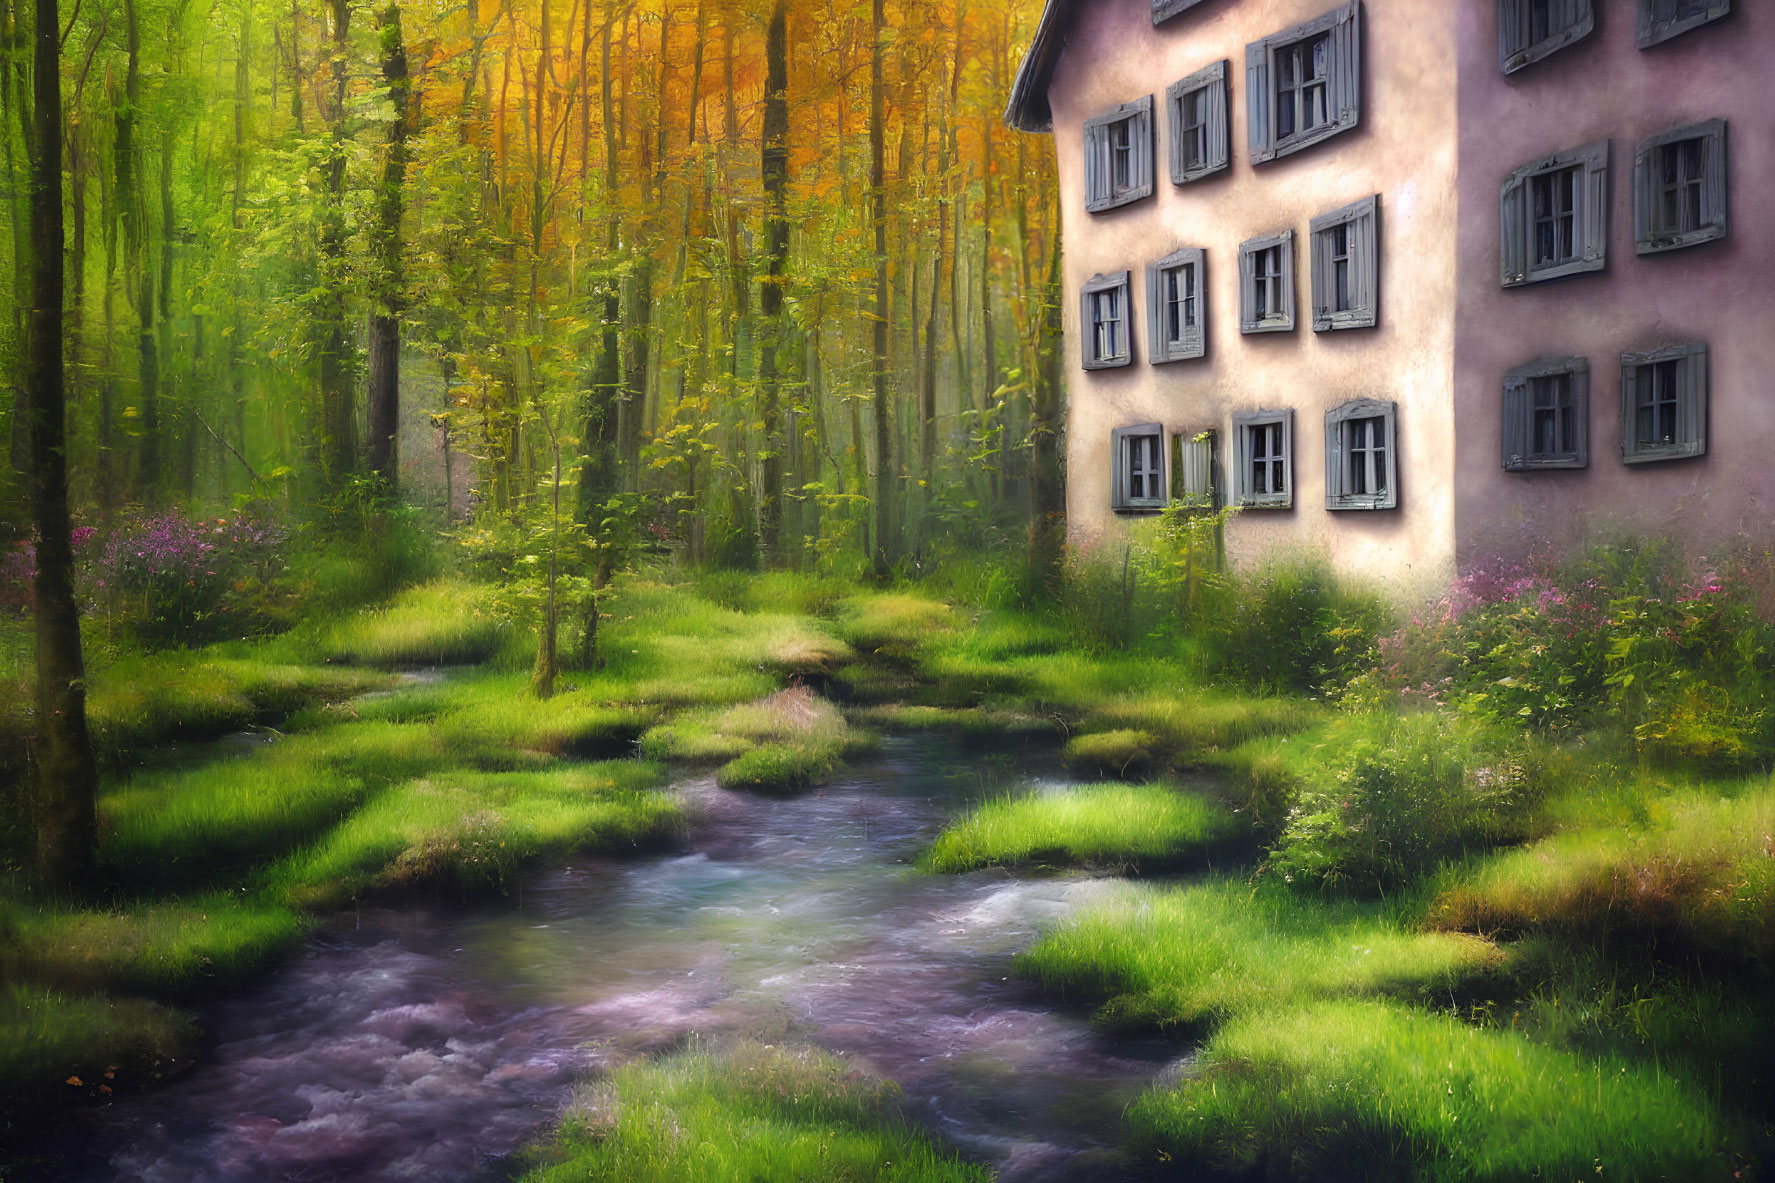 Tranquil stream in vibrant forest with fairytale house